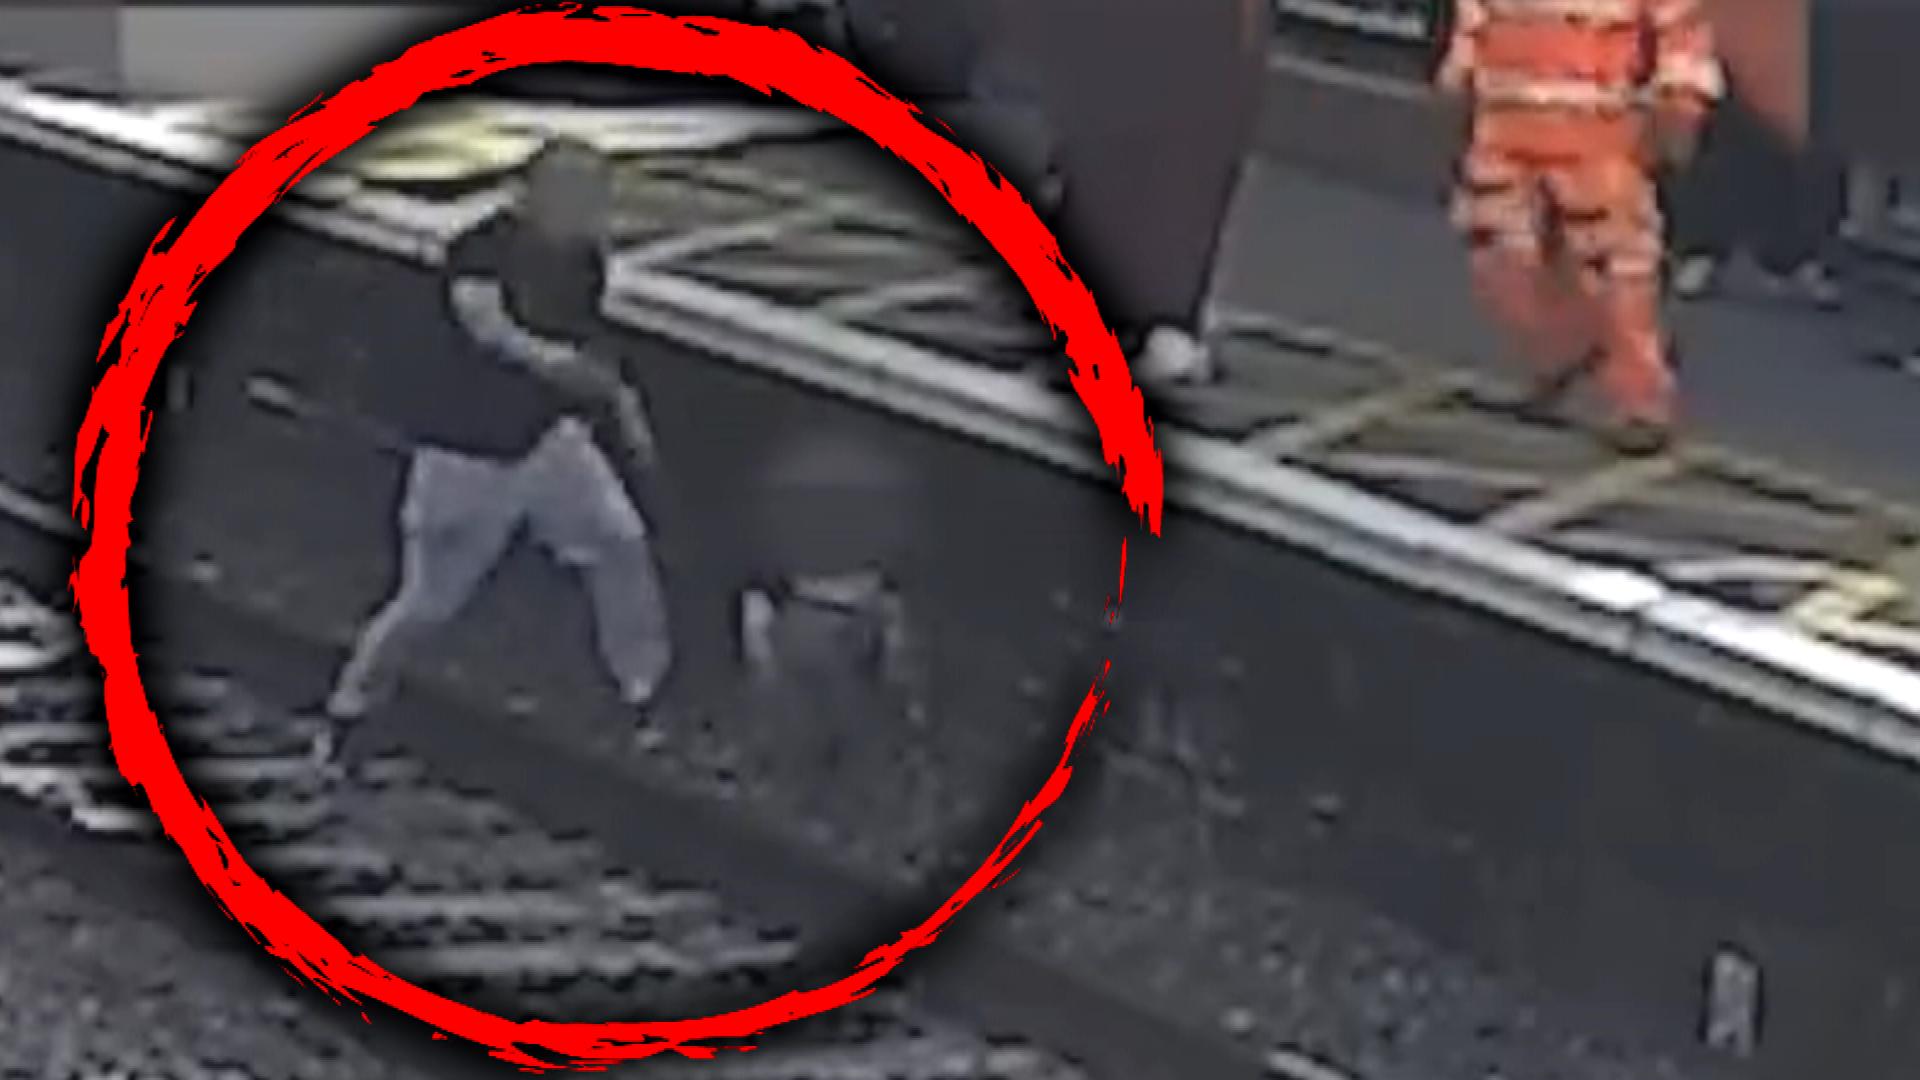 A child was pulled from the tracks mere seconds before a train sped through a station.